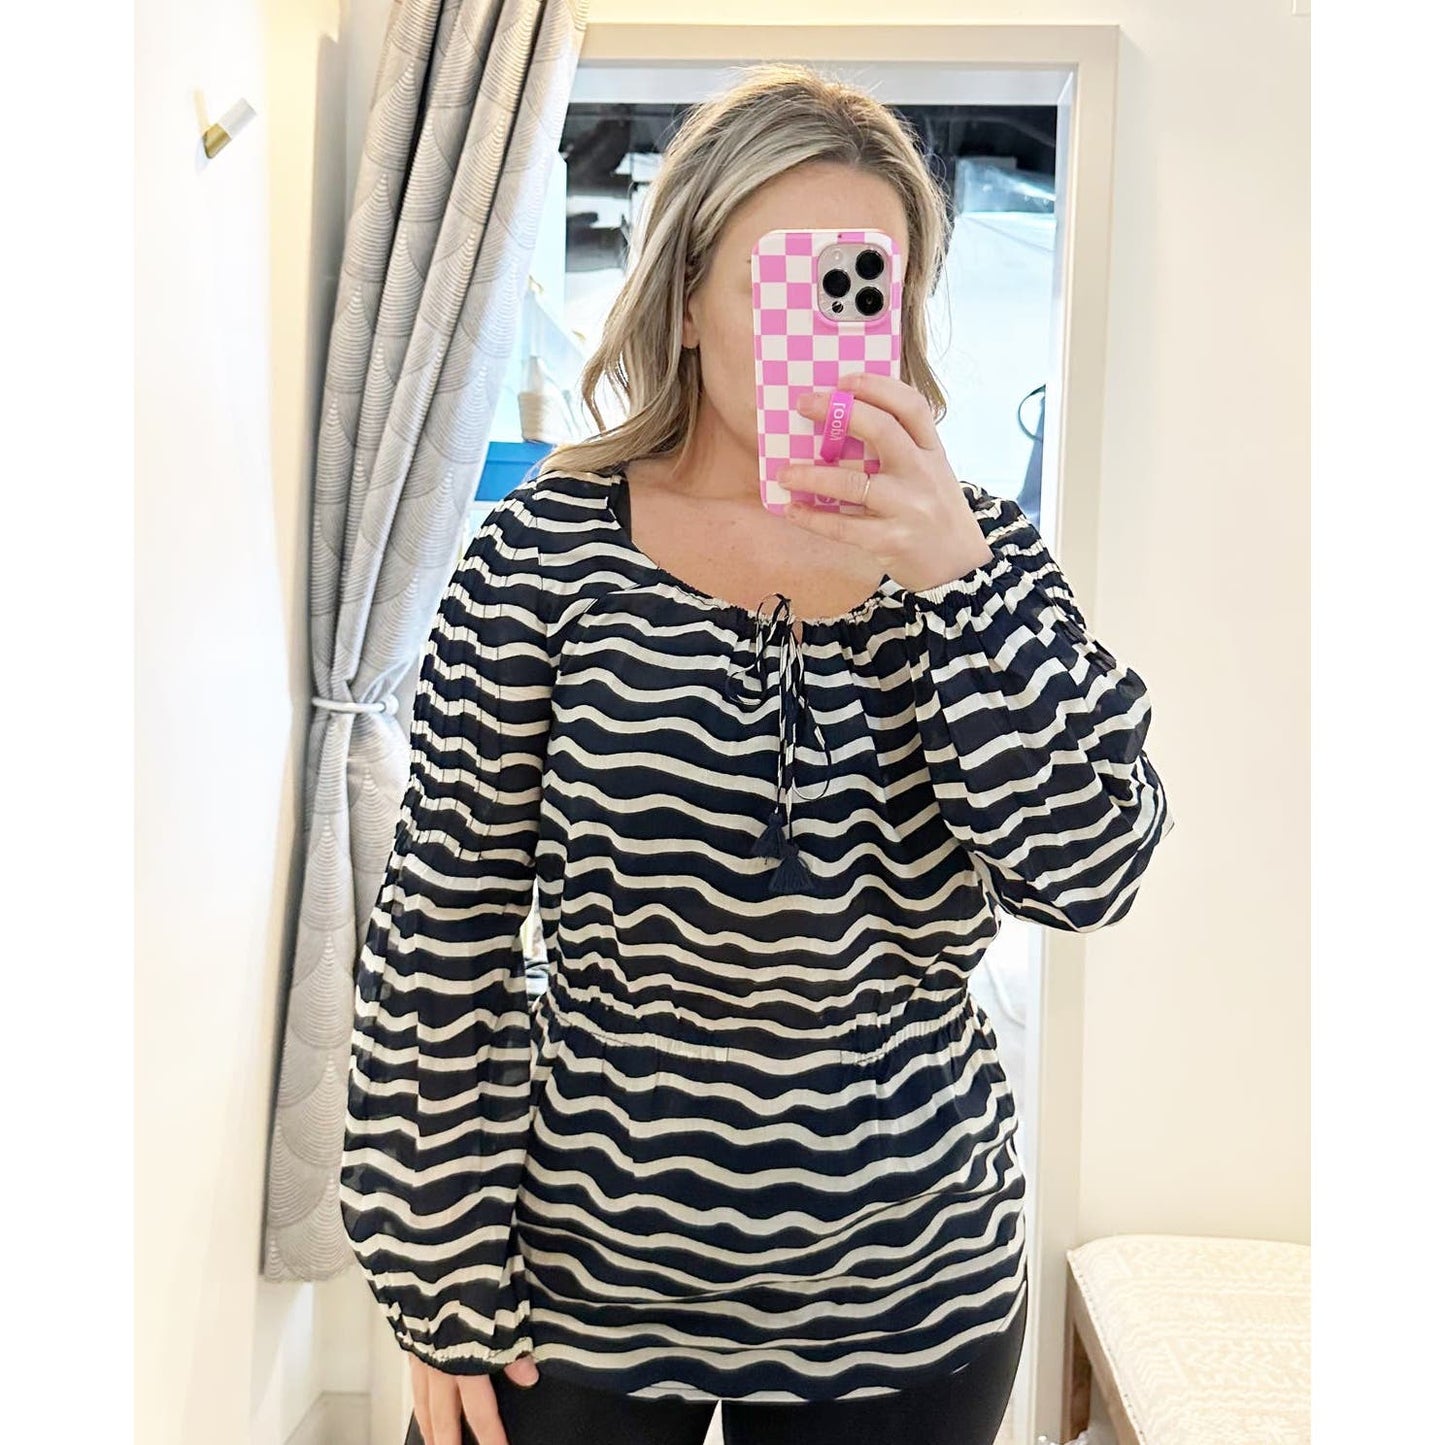 Tory Burch Cotton Striped Waves Long Sleeve Cotton Blouse Navy Blue 8